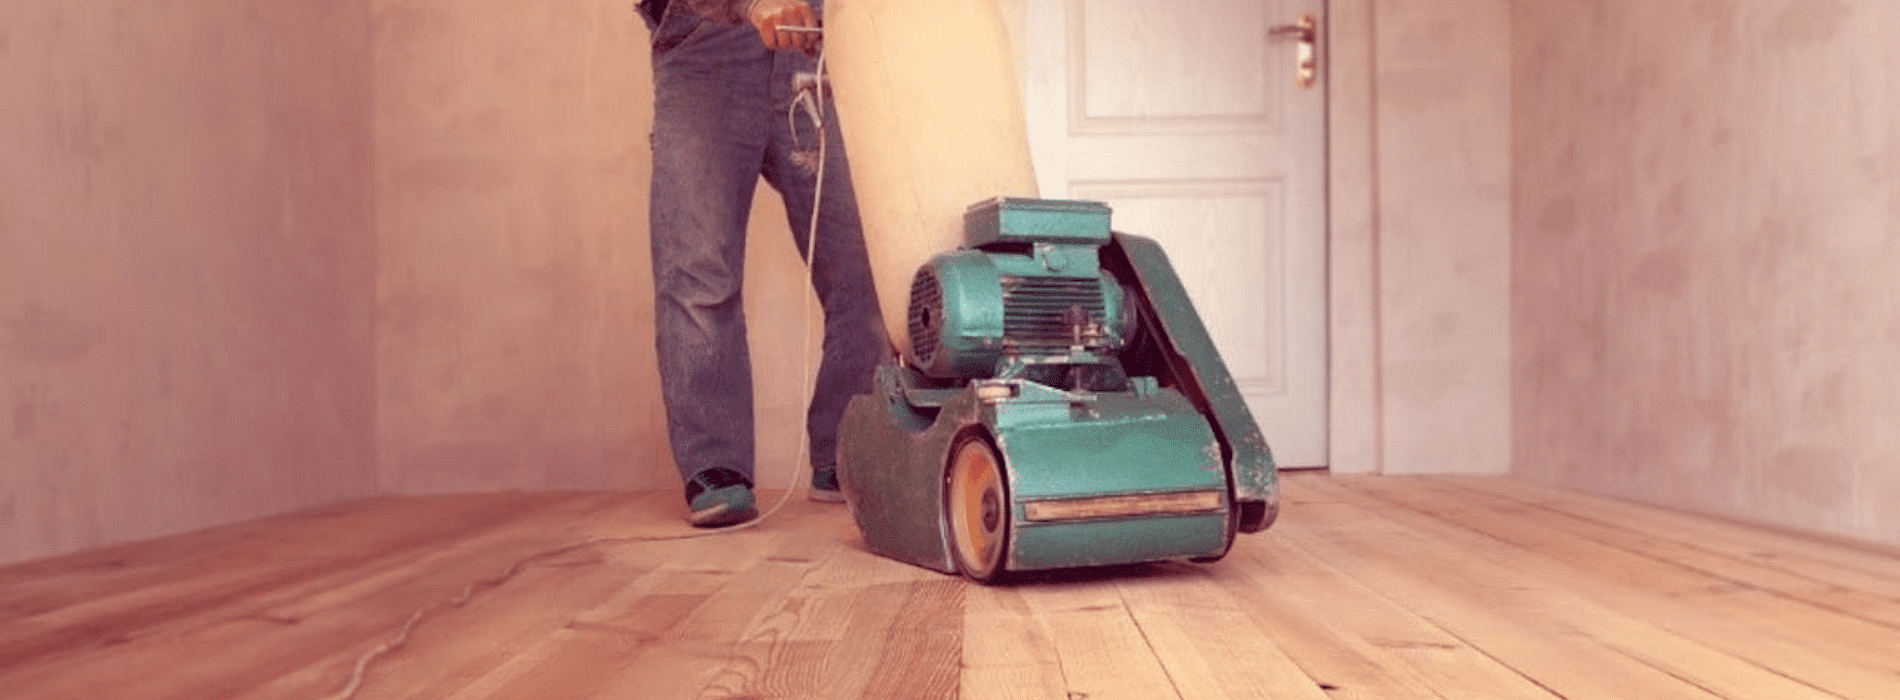 Mr Sander® in Petersfield, GU31, employing the powerful Bona Belt sander (2.2 kW) to sand herringbone floors. Operating at 230V and 50Hz/60Hz, this 250x750 mm sander is connected to a dust extraction system featuring a HEPA filter, guaranteeing a thorough and efficient result. 